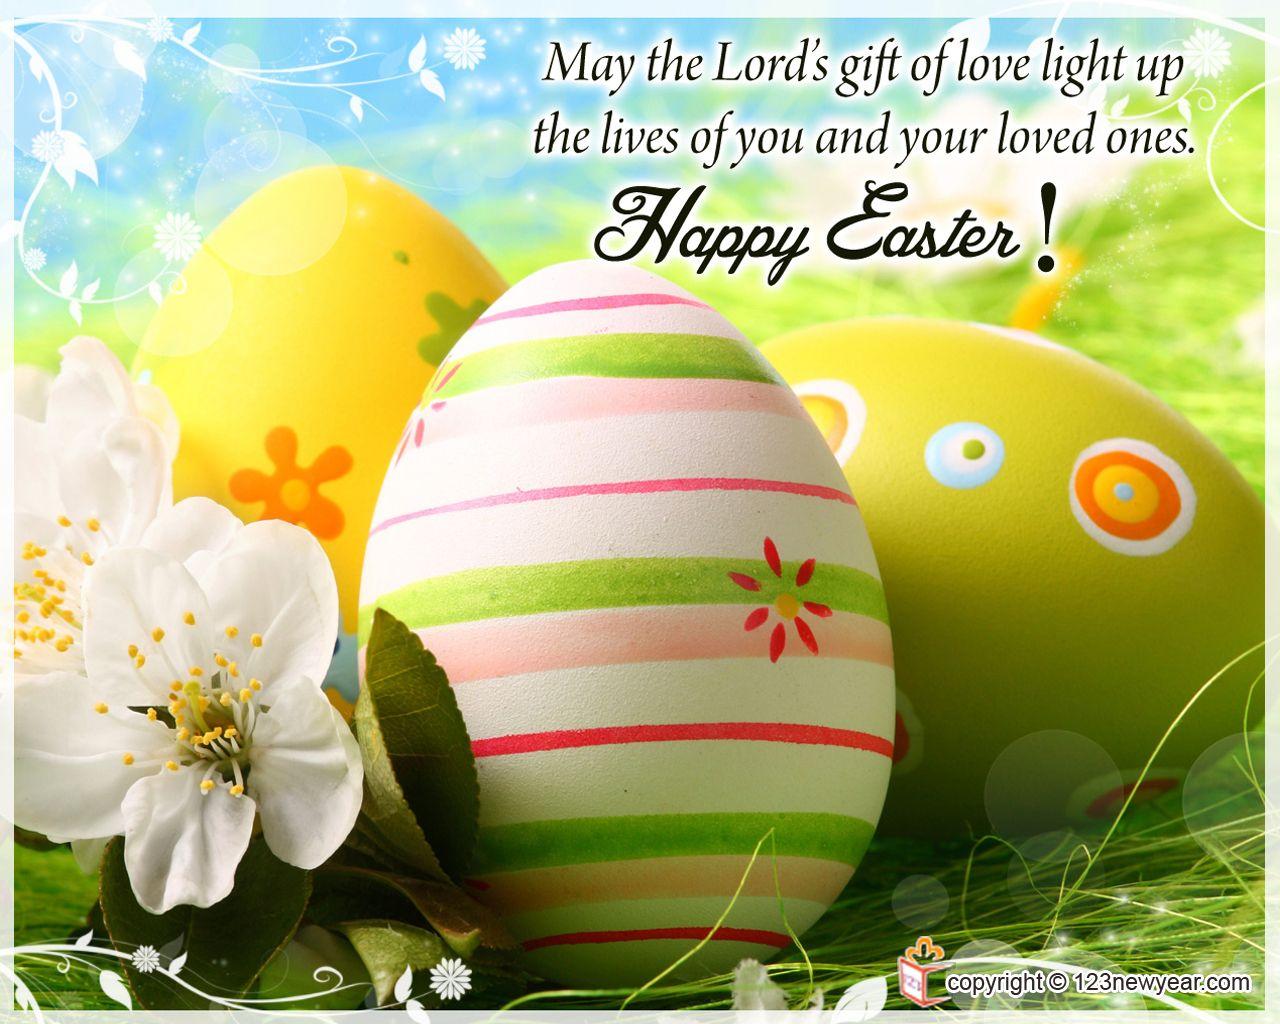 Happy Easter Sunday Image Quotes Greeting Cards 2018